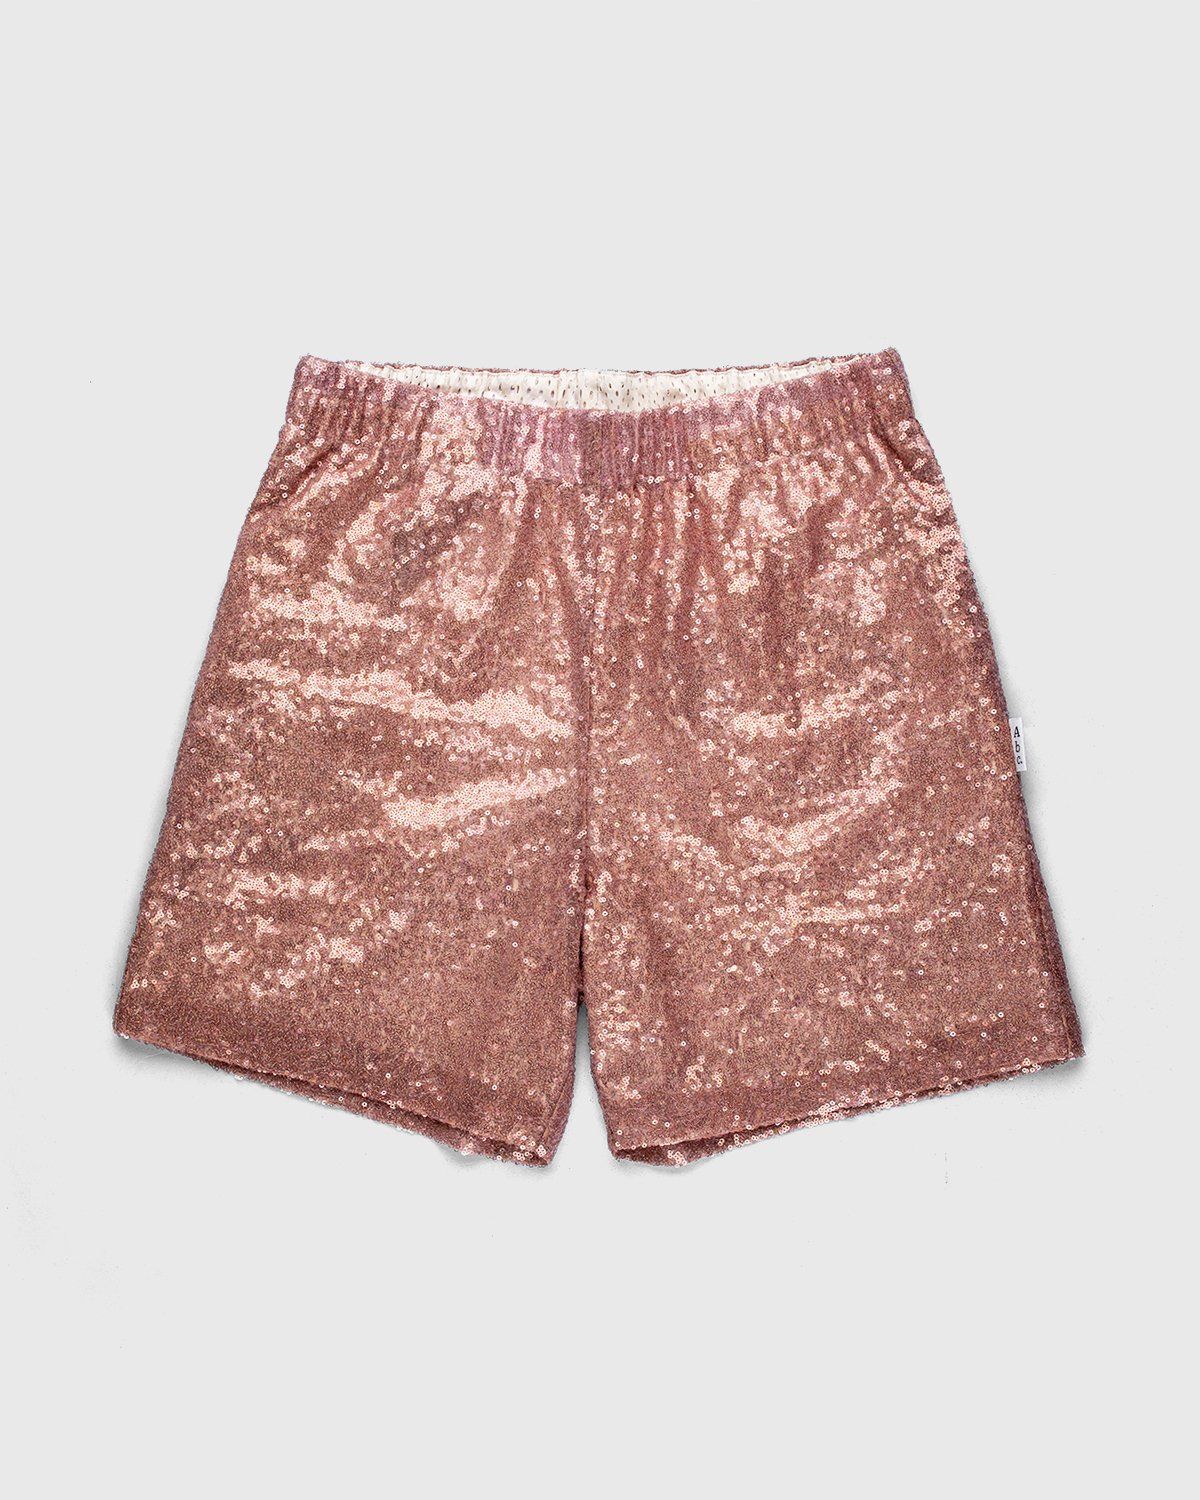 Advisory Board Crystals x Highsnobiety – Sequin Shorts Pink - Shorts - Pink - Image 1